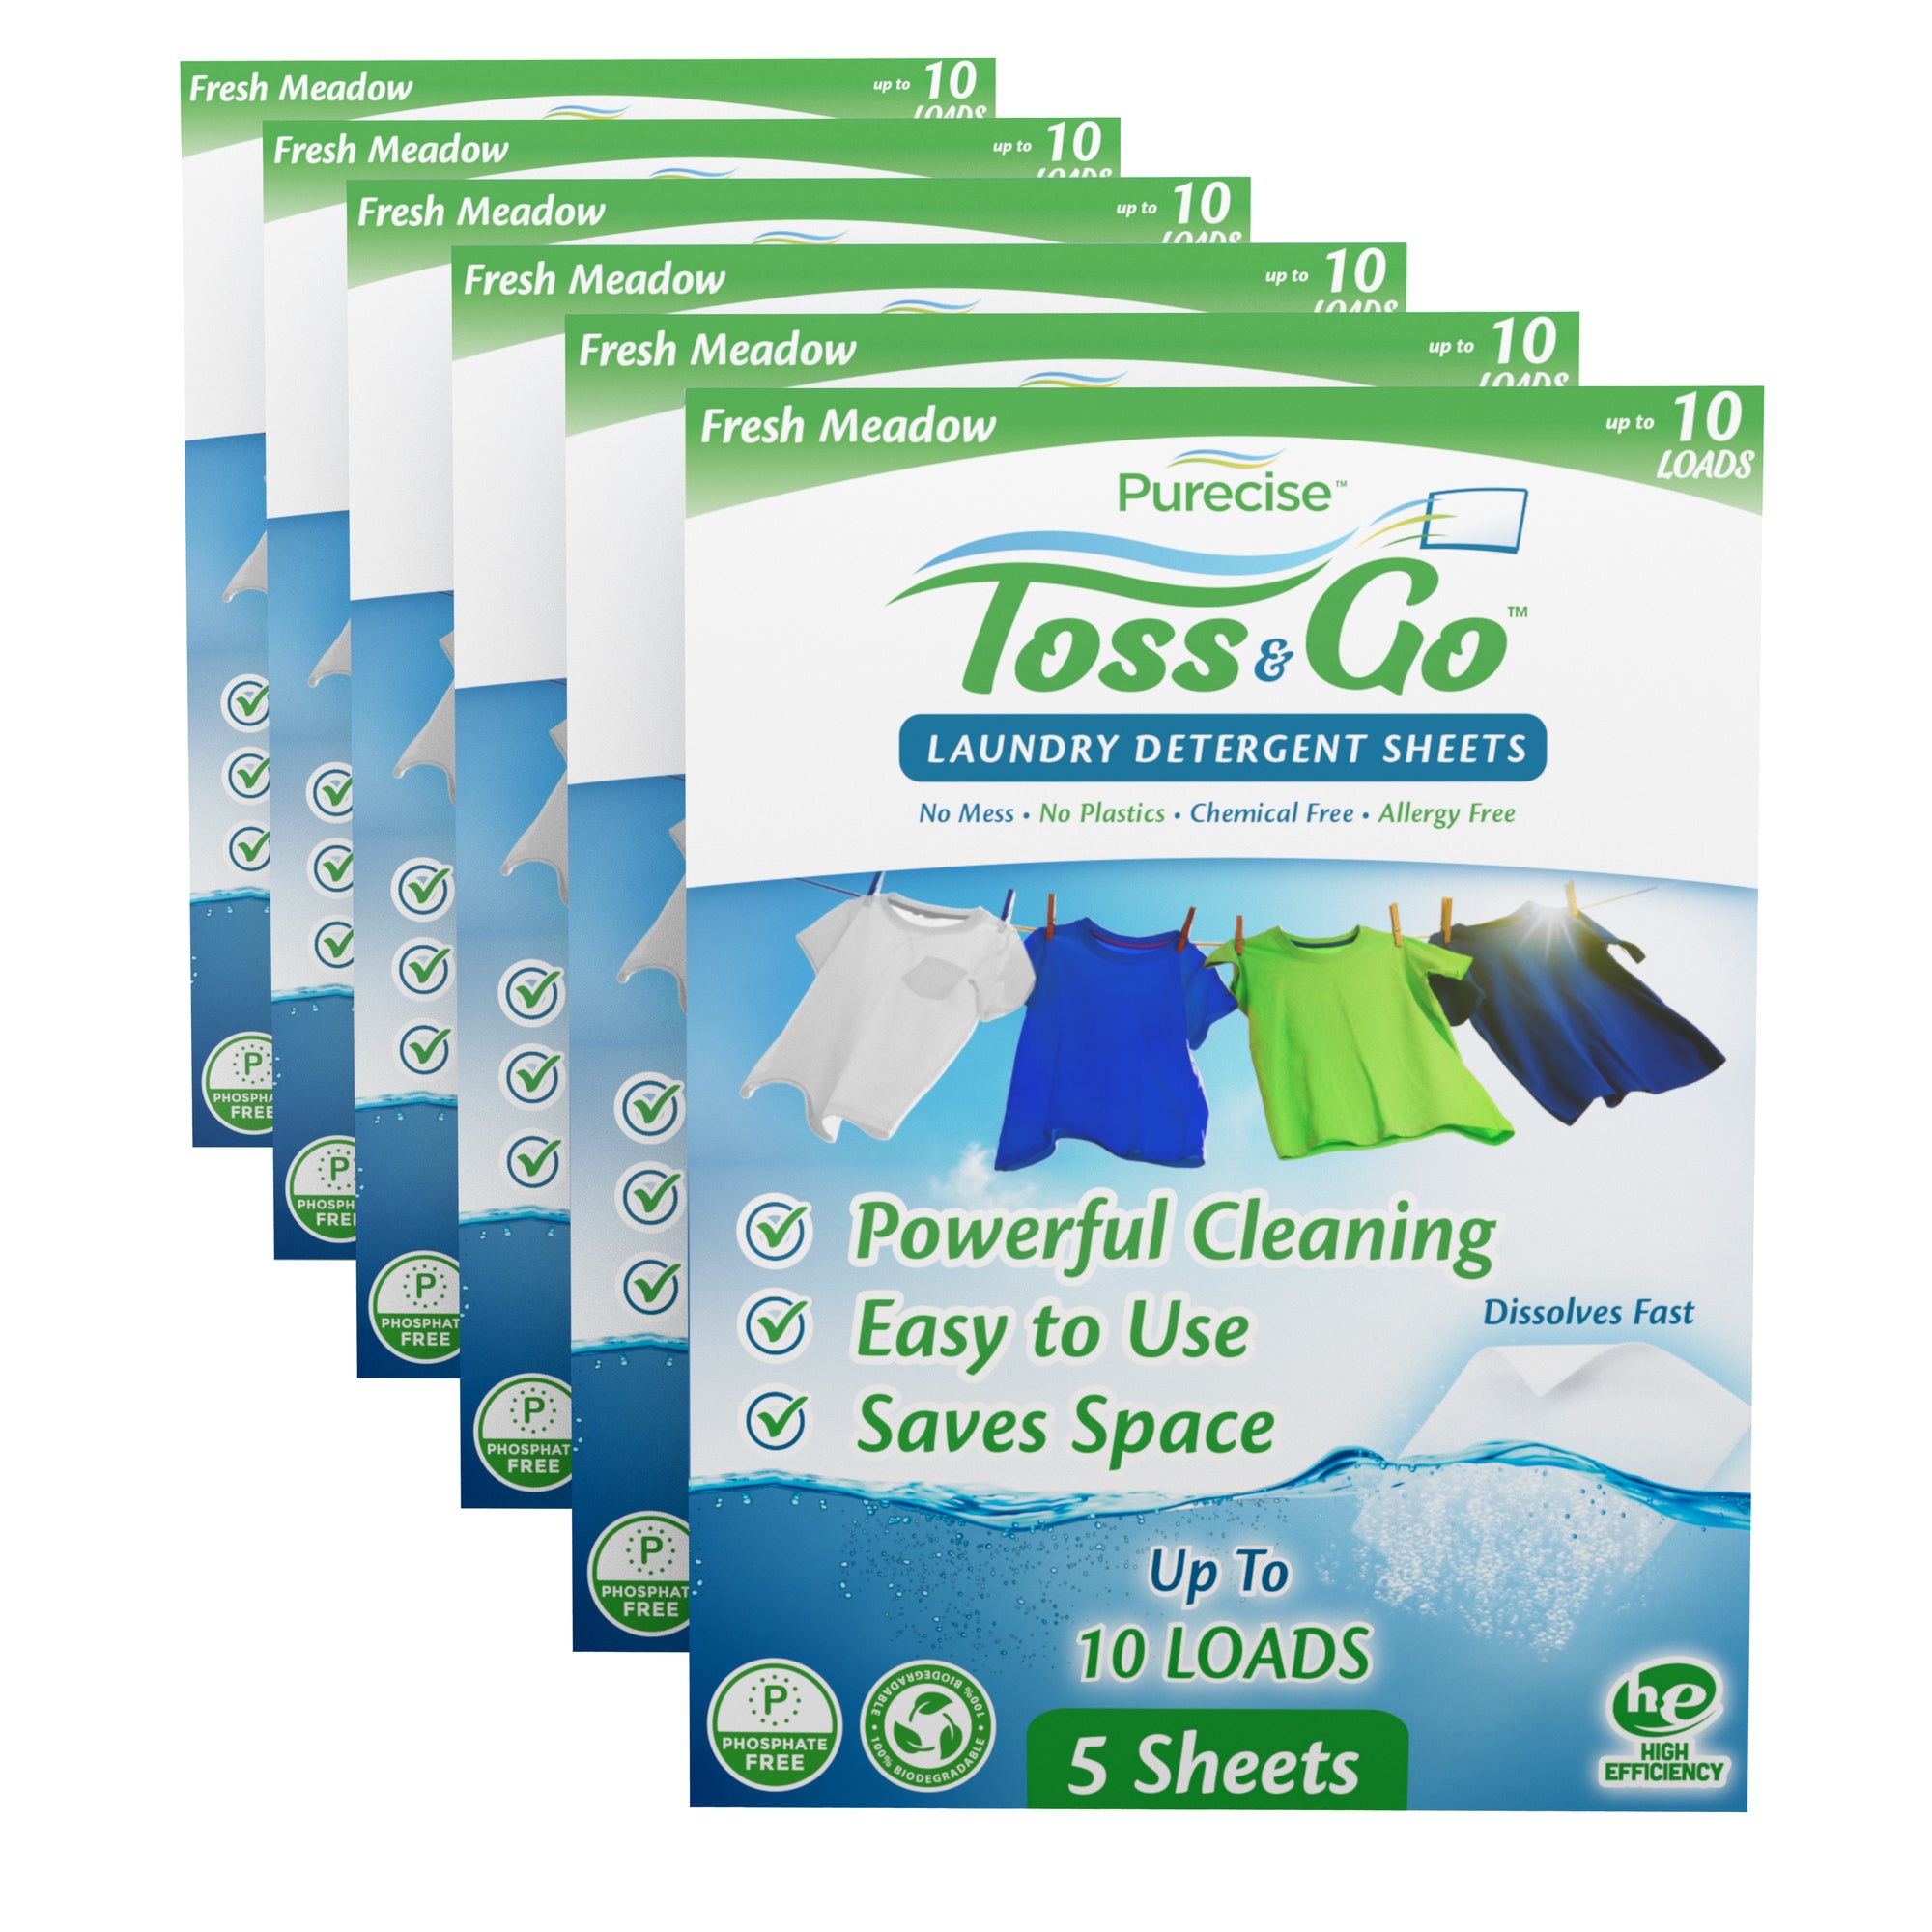 Toss & Go Laundry Detergent Sheets Six Pack by Purecise